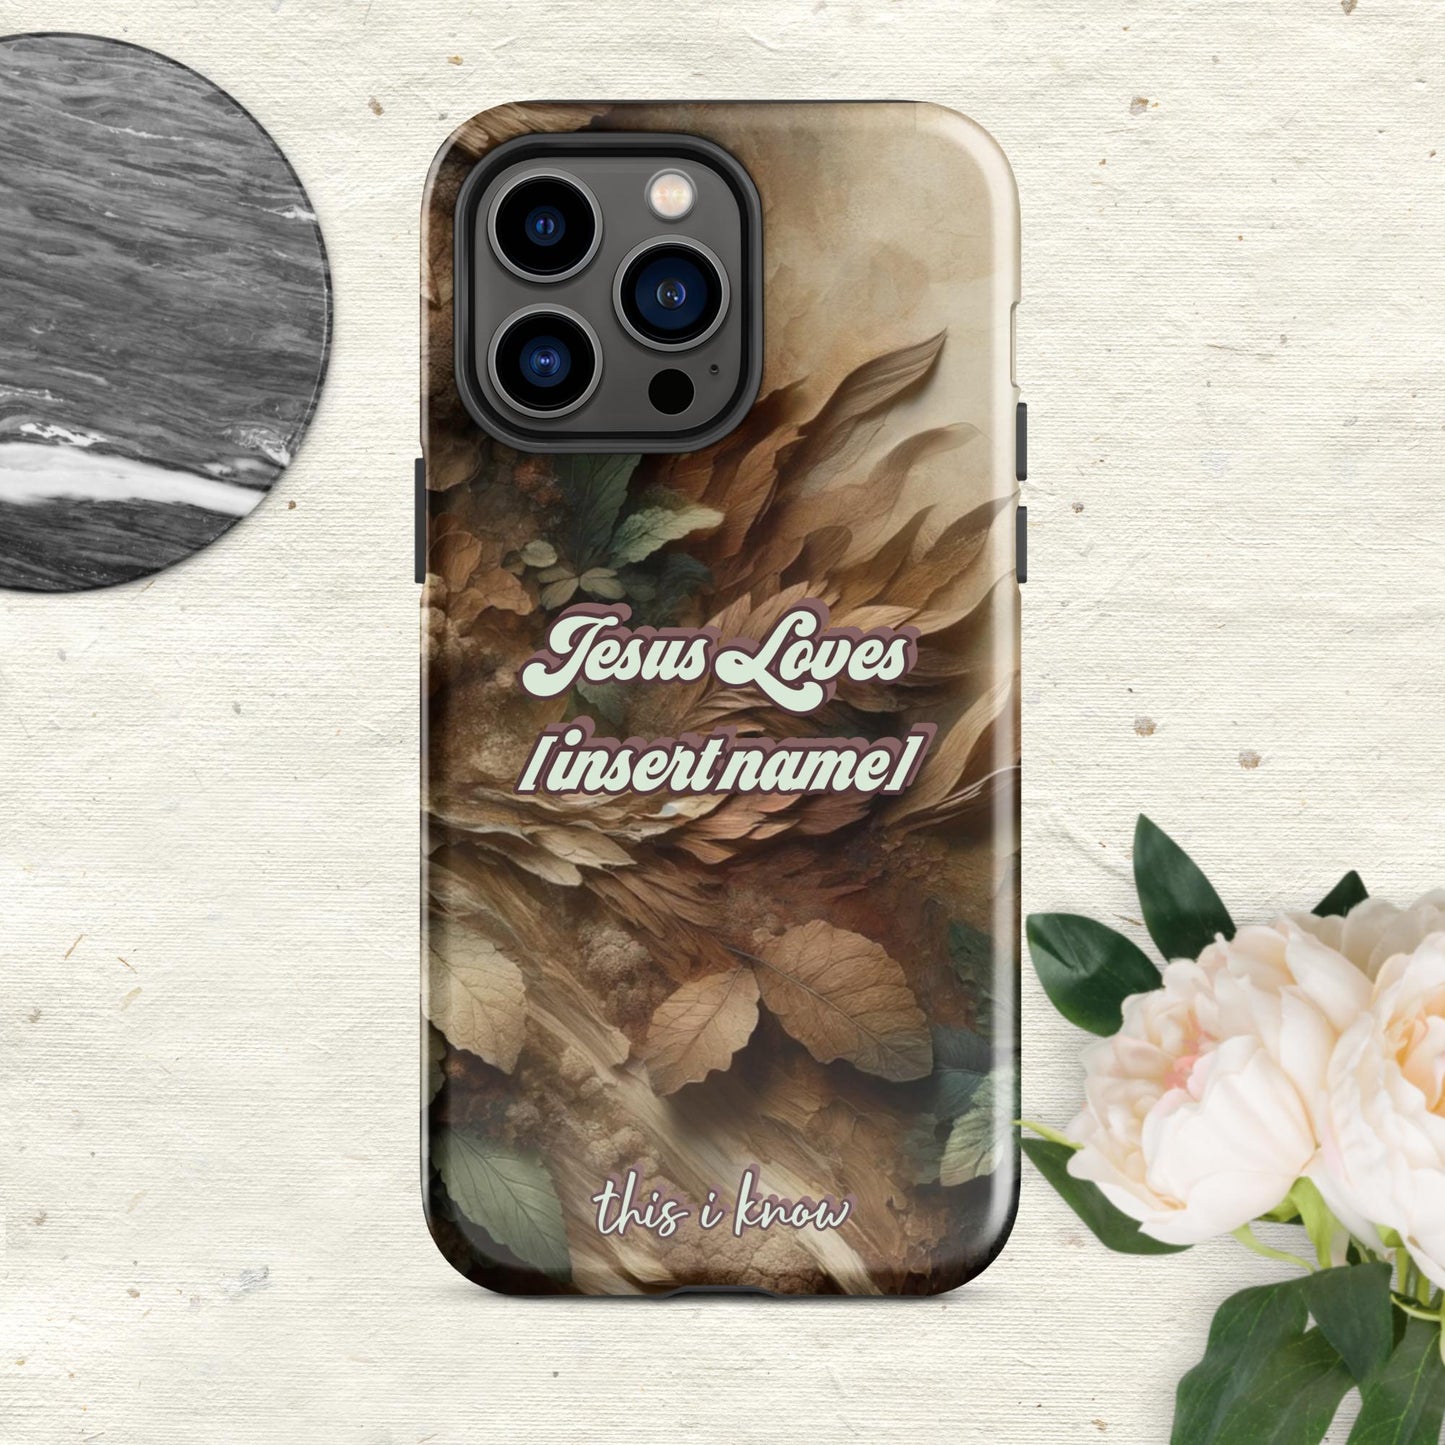 Trendyguard Glossy / iPhone 14 Pro Max Jesus Loves [insertname] This I Know | Custom Tough Case for iPhone®